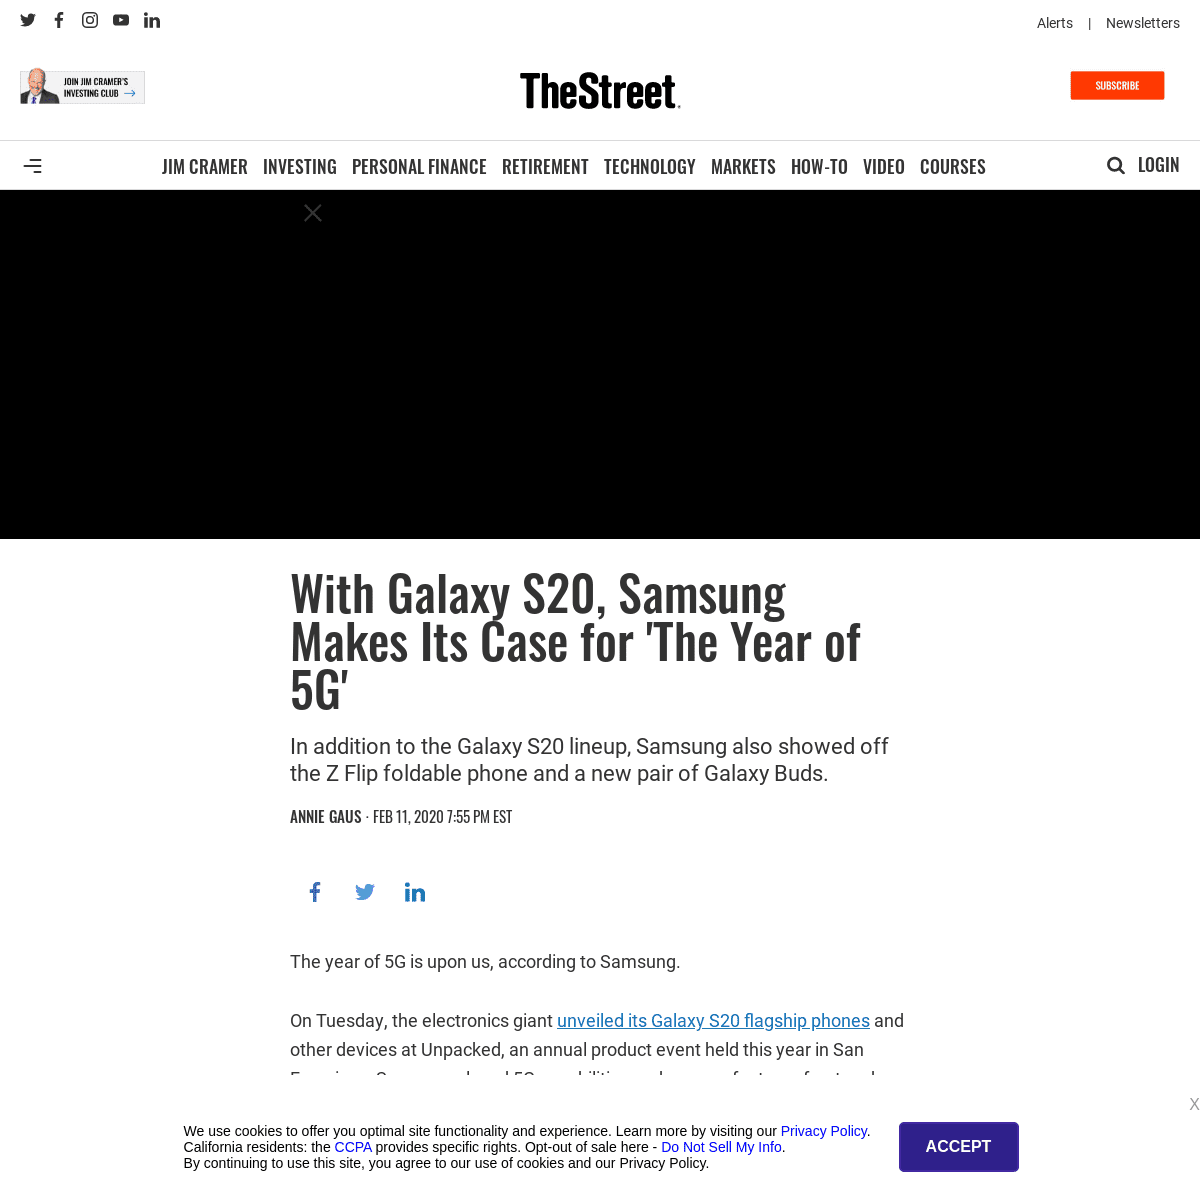 A complete backup of www.thestreet.com/investing/with-galaxy-s20-samsung-makes-its-case-for-the-year-of-5g